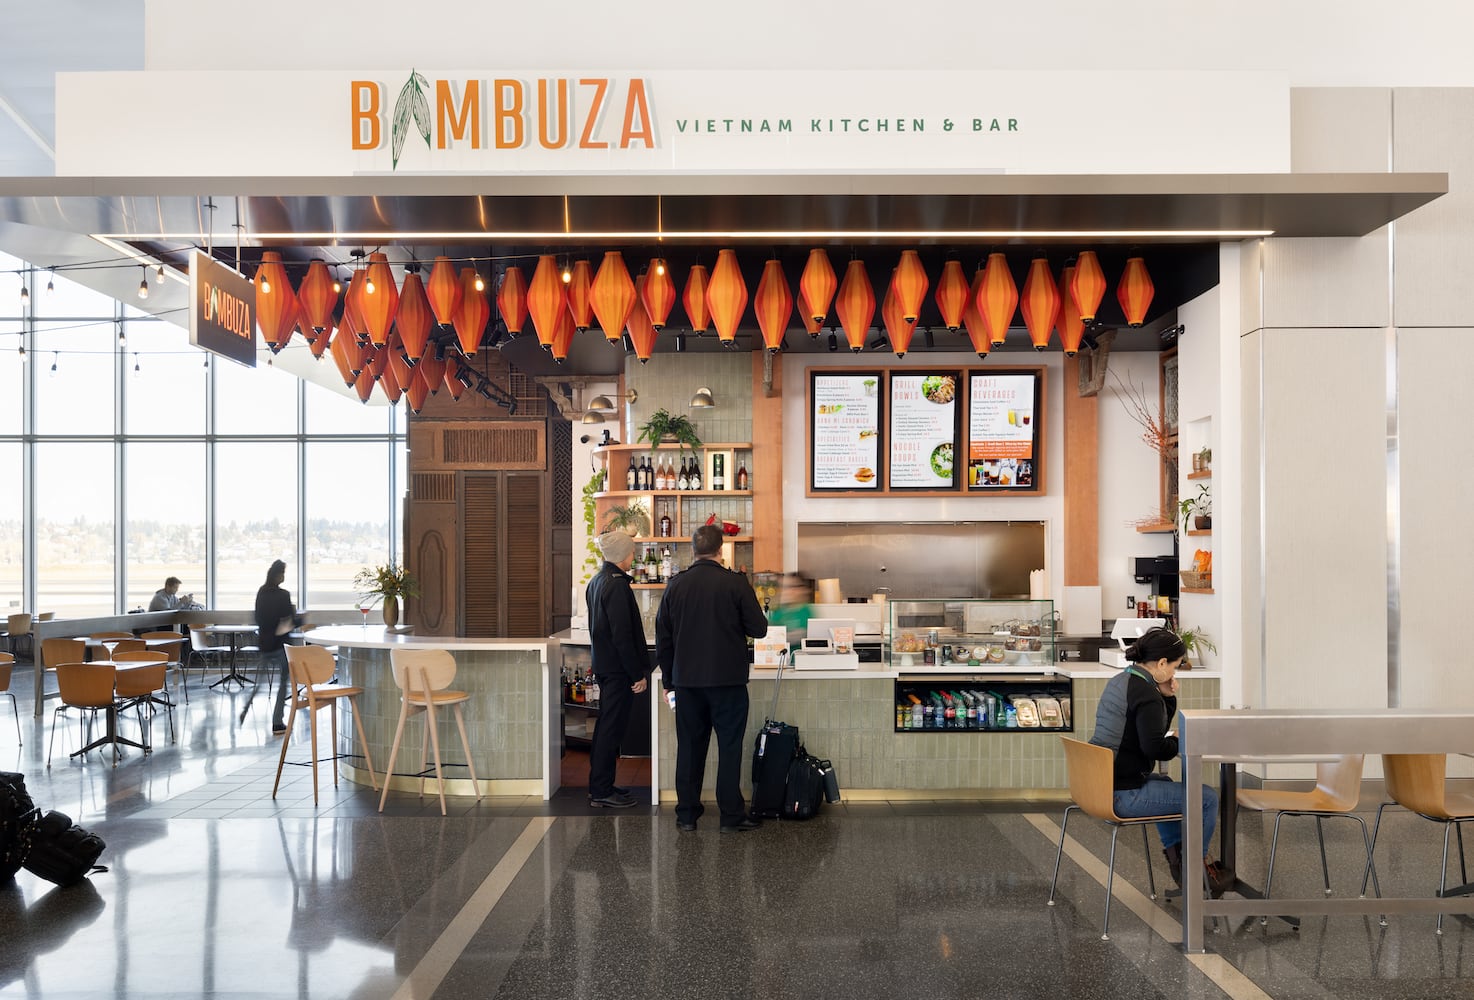 Travelers order food at Bambuza with Vietnamese-inspired decor surrounding the bar